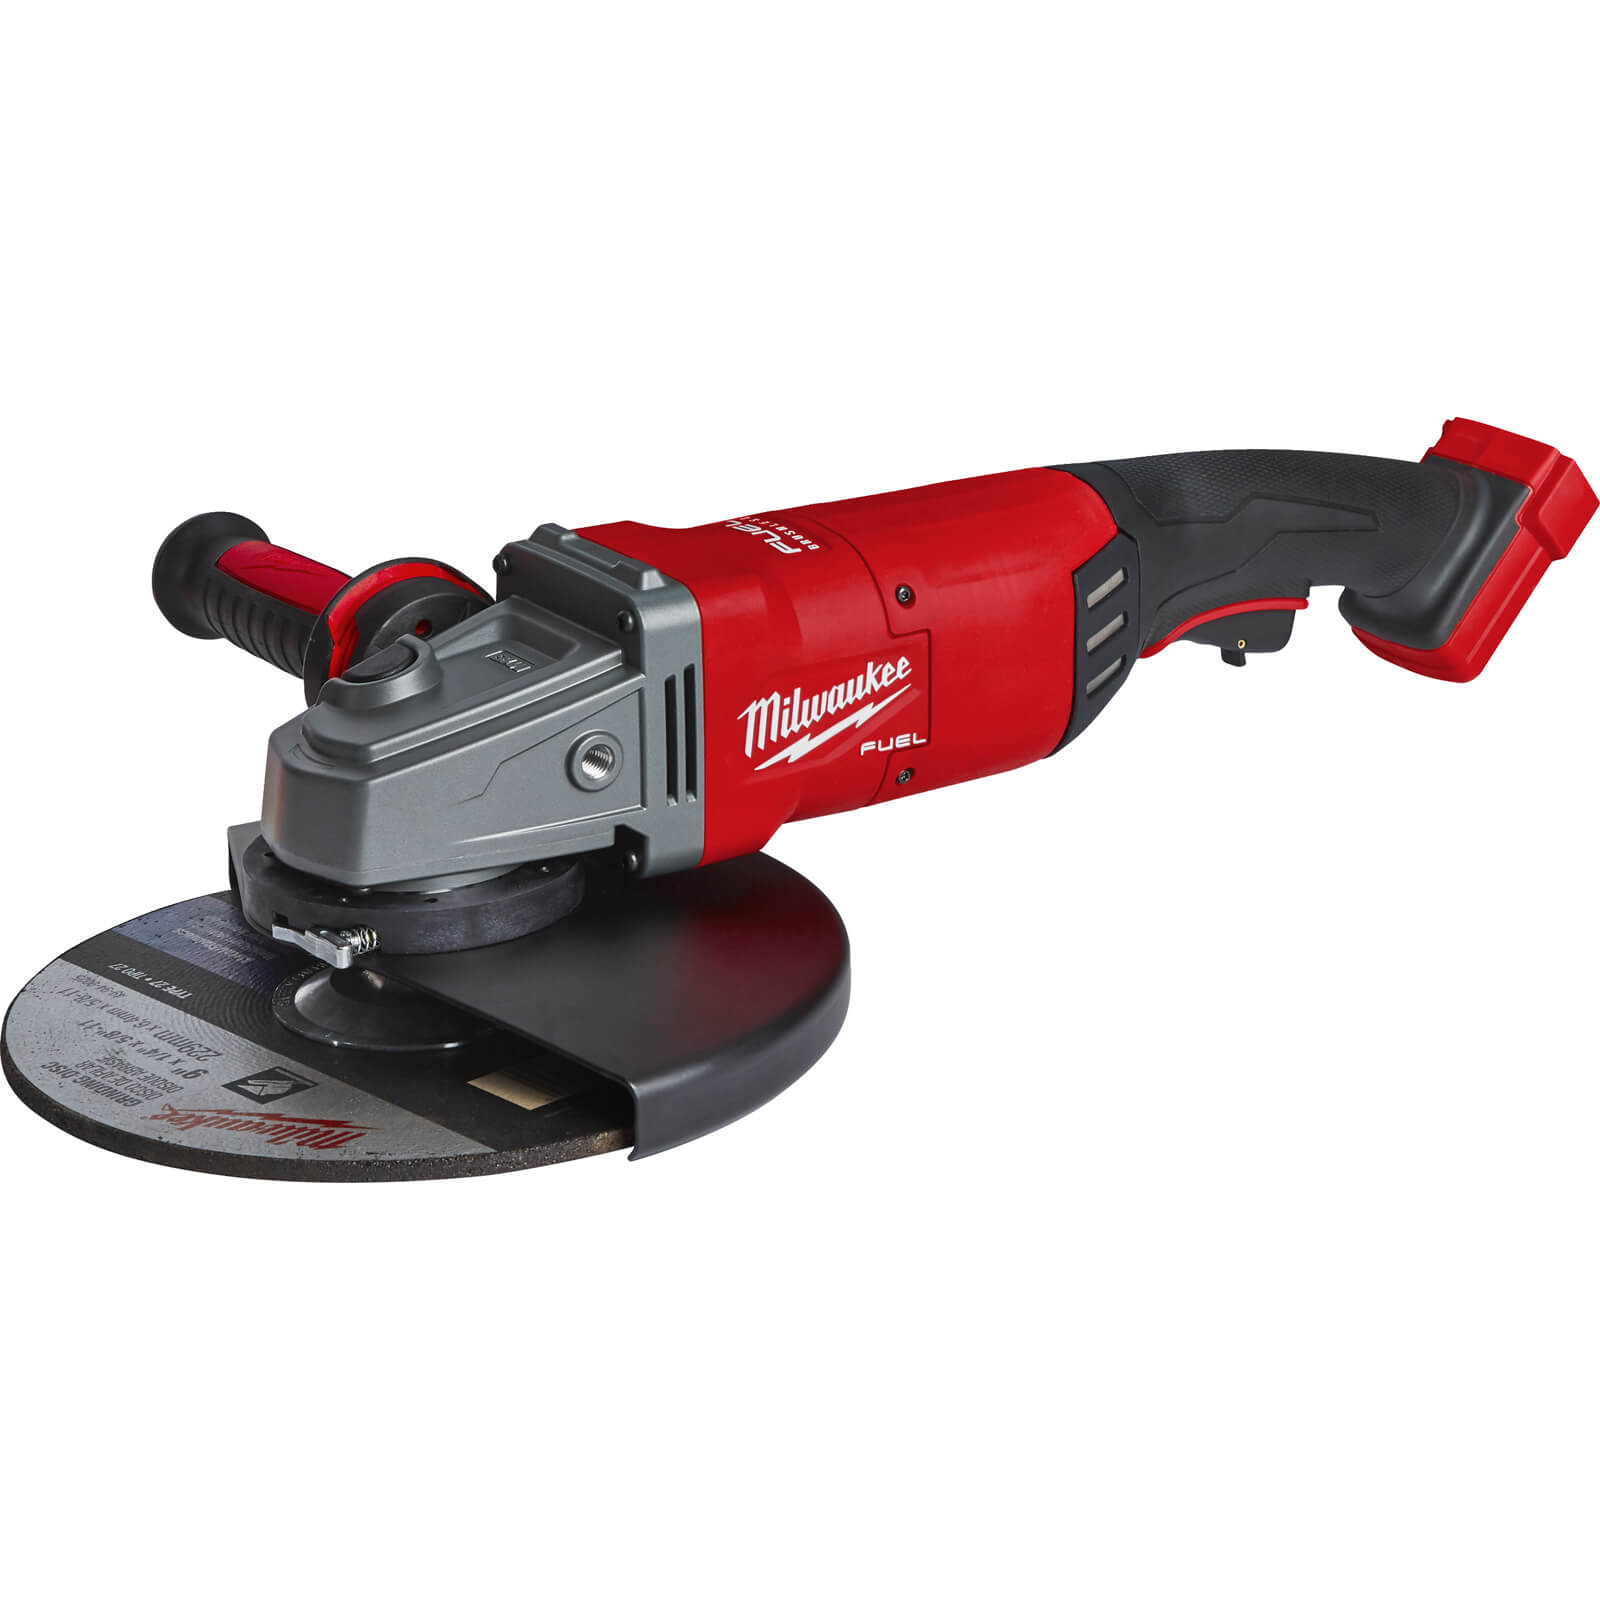 Image of Milwaukee M18 FLAG230XPDB Fuel 18v Cordless Brushless Angle Grinder 230mm No Batteries No Charger Case